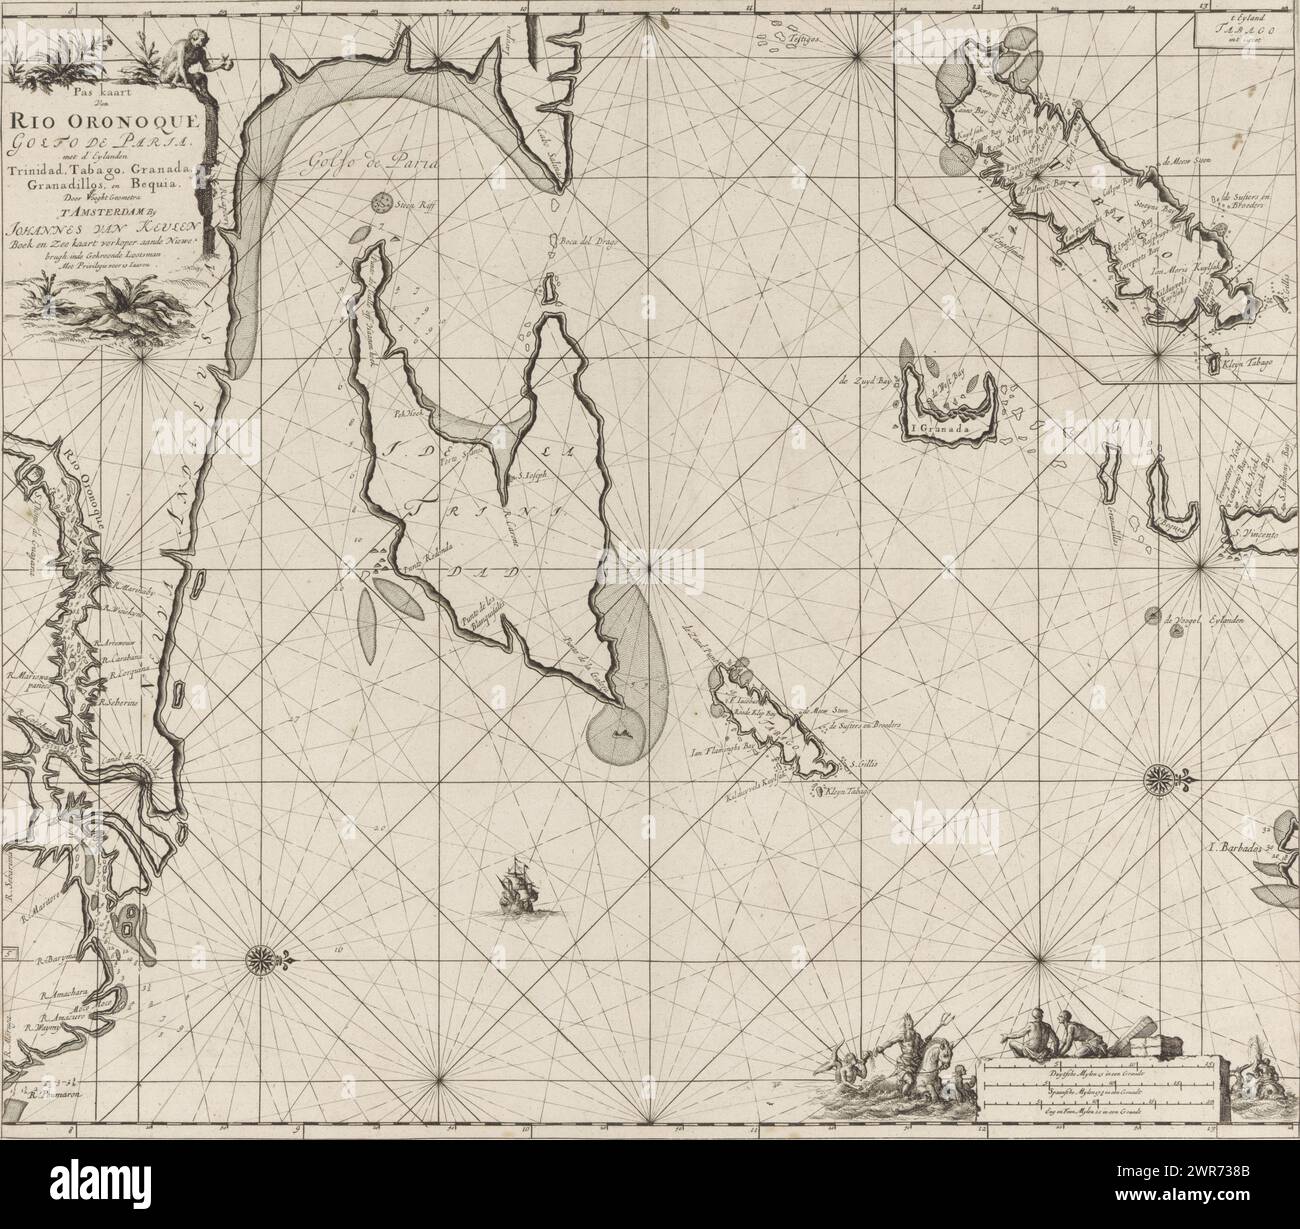 Pass map of the Gulf of Paria with the mouth of the Orinoco river, Pass map of Rio Oronoque Golfo De Paria. with the islands of Trinidad, Tabago, Granada, Granadillos, and Bequia (title on object), Map of the Gulf of Paria with the mouth of the Orinoco River and an inset map of Tobago. With two compass roses, North is on the right. Top left a monkey next to the title and the address of the publisher. Bottom right Neptune with trident and crown on a sea horse accompanied by two mermen. Two men with bales of merchandise near the scale, shown in German Stock Photo